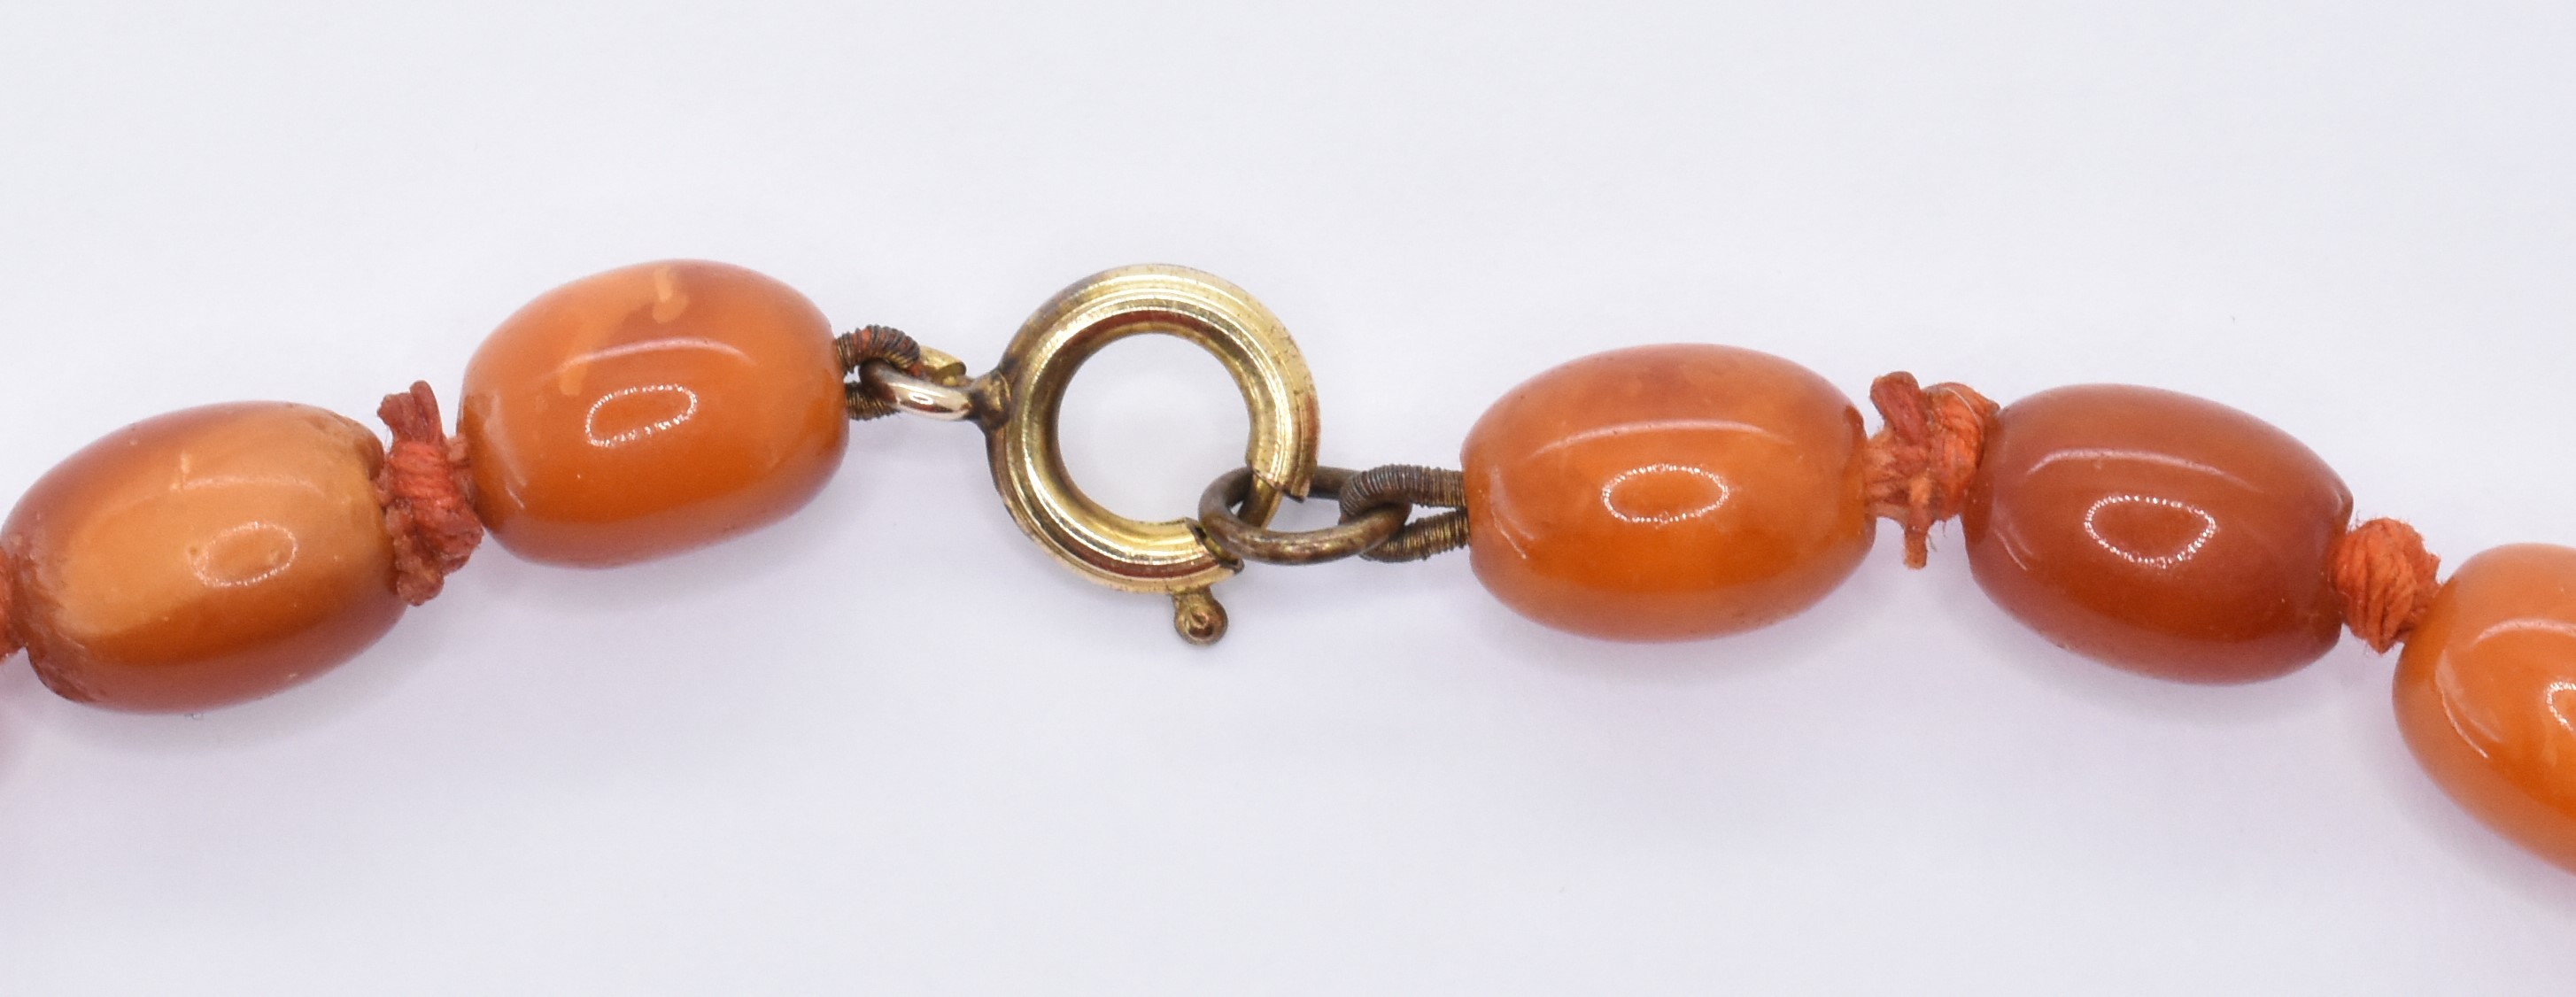 AMBER BEAD NECKLACE - Image 5 of 6